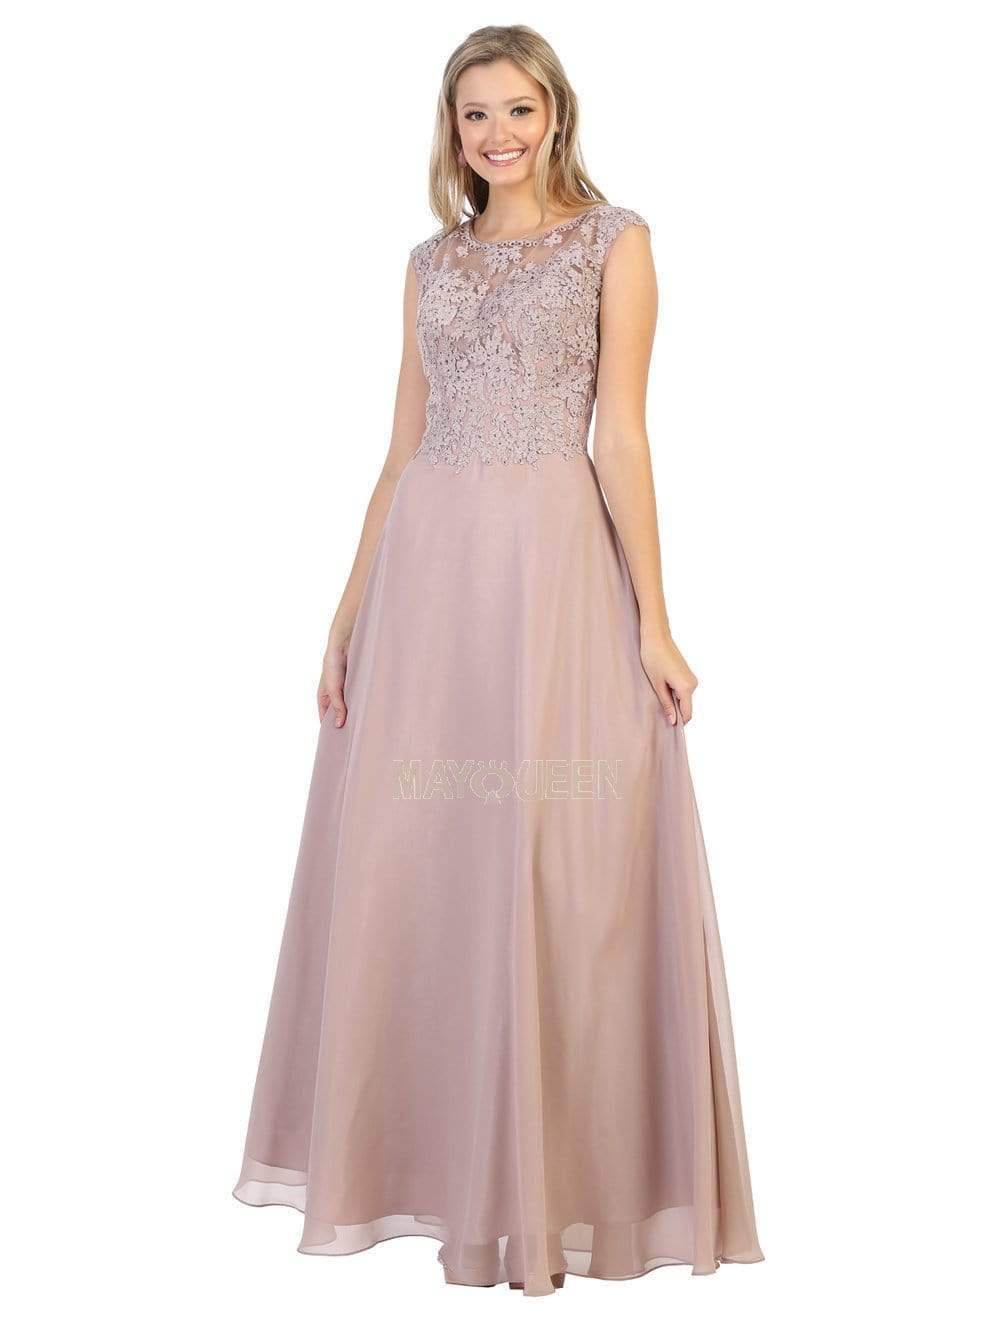 May Queen - MQ1725 Lace Bodice Chiffon A-Line Long Formal Dress Mother of the Bride Dresses 4 / Mauve